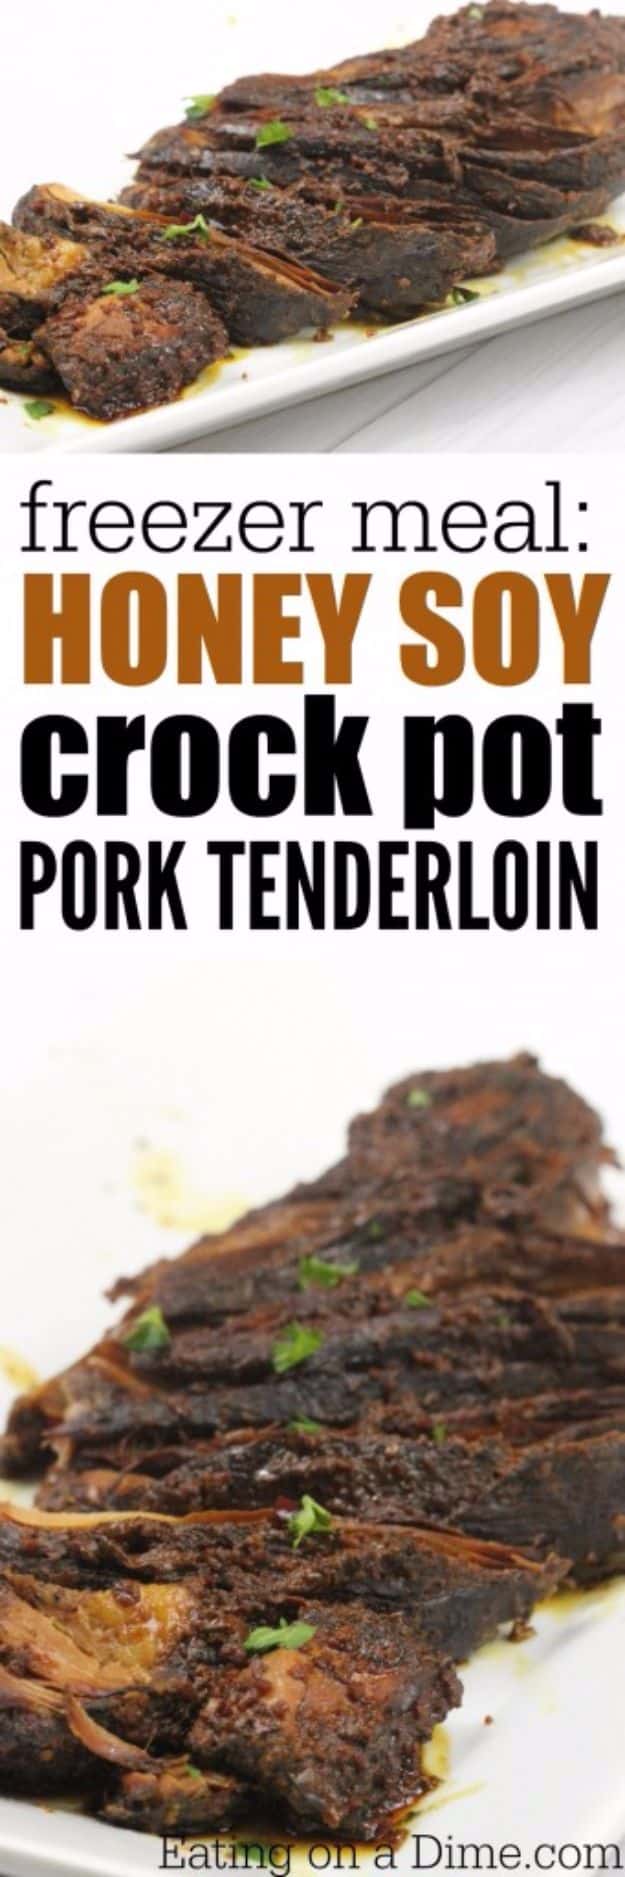 Healthy Crockpot Recipes to Make and Freeze Ahead - Honey Soy Crock Pot Pork Tenderloin - Easy and Quick Dinners, Soups, Sides You Make Put In The Freezer for Simple Last Minute Cooking - Low Fat Chicken, beef stew recipe